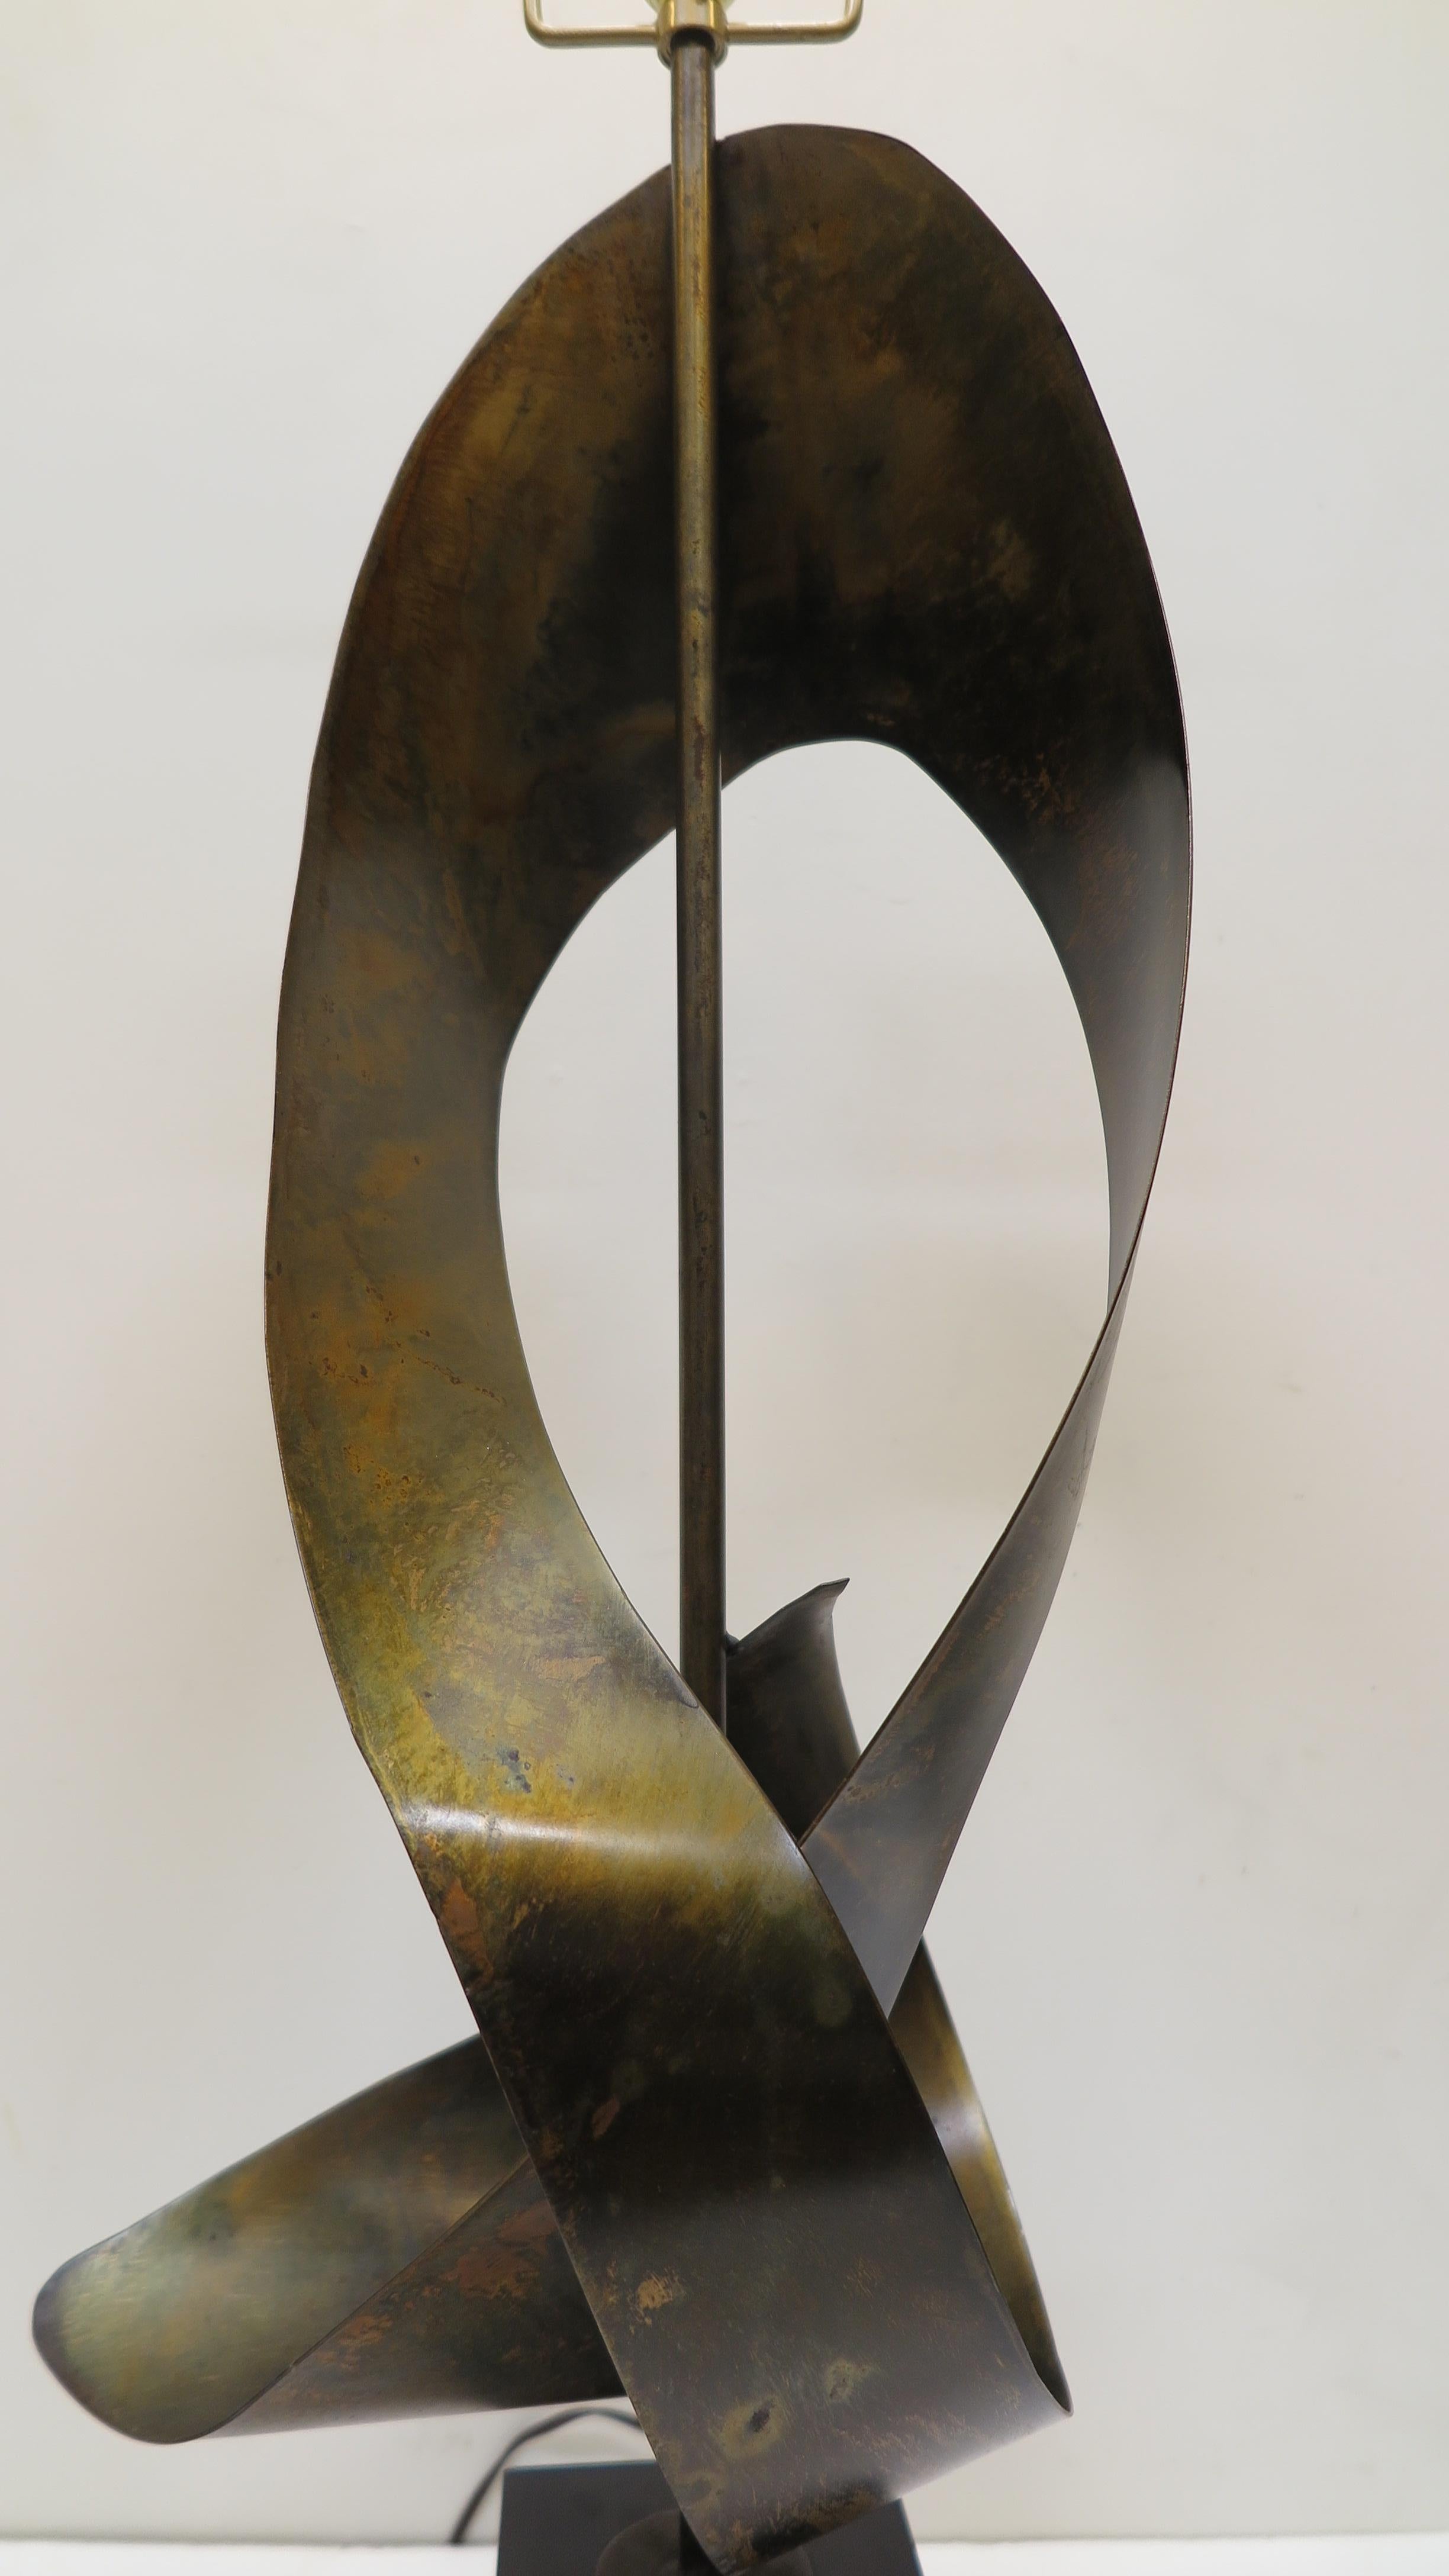 Brutalist Sculptural Lamp by Richard Barr for Laurel Lamp Company. Patinated bronzed steel sculpted into an abstract ribbon type shape. Mounted on steel black box stand. Wonderfully modern sculptural art functioning as a lamp. Adds significant